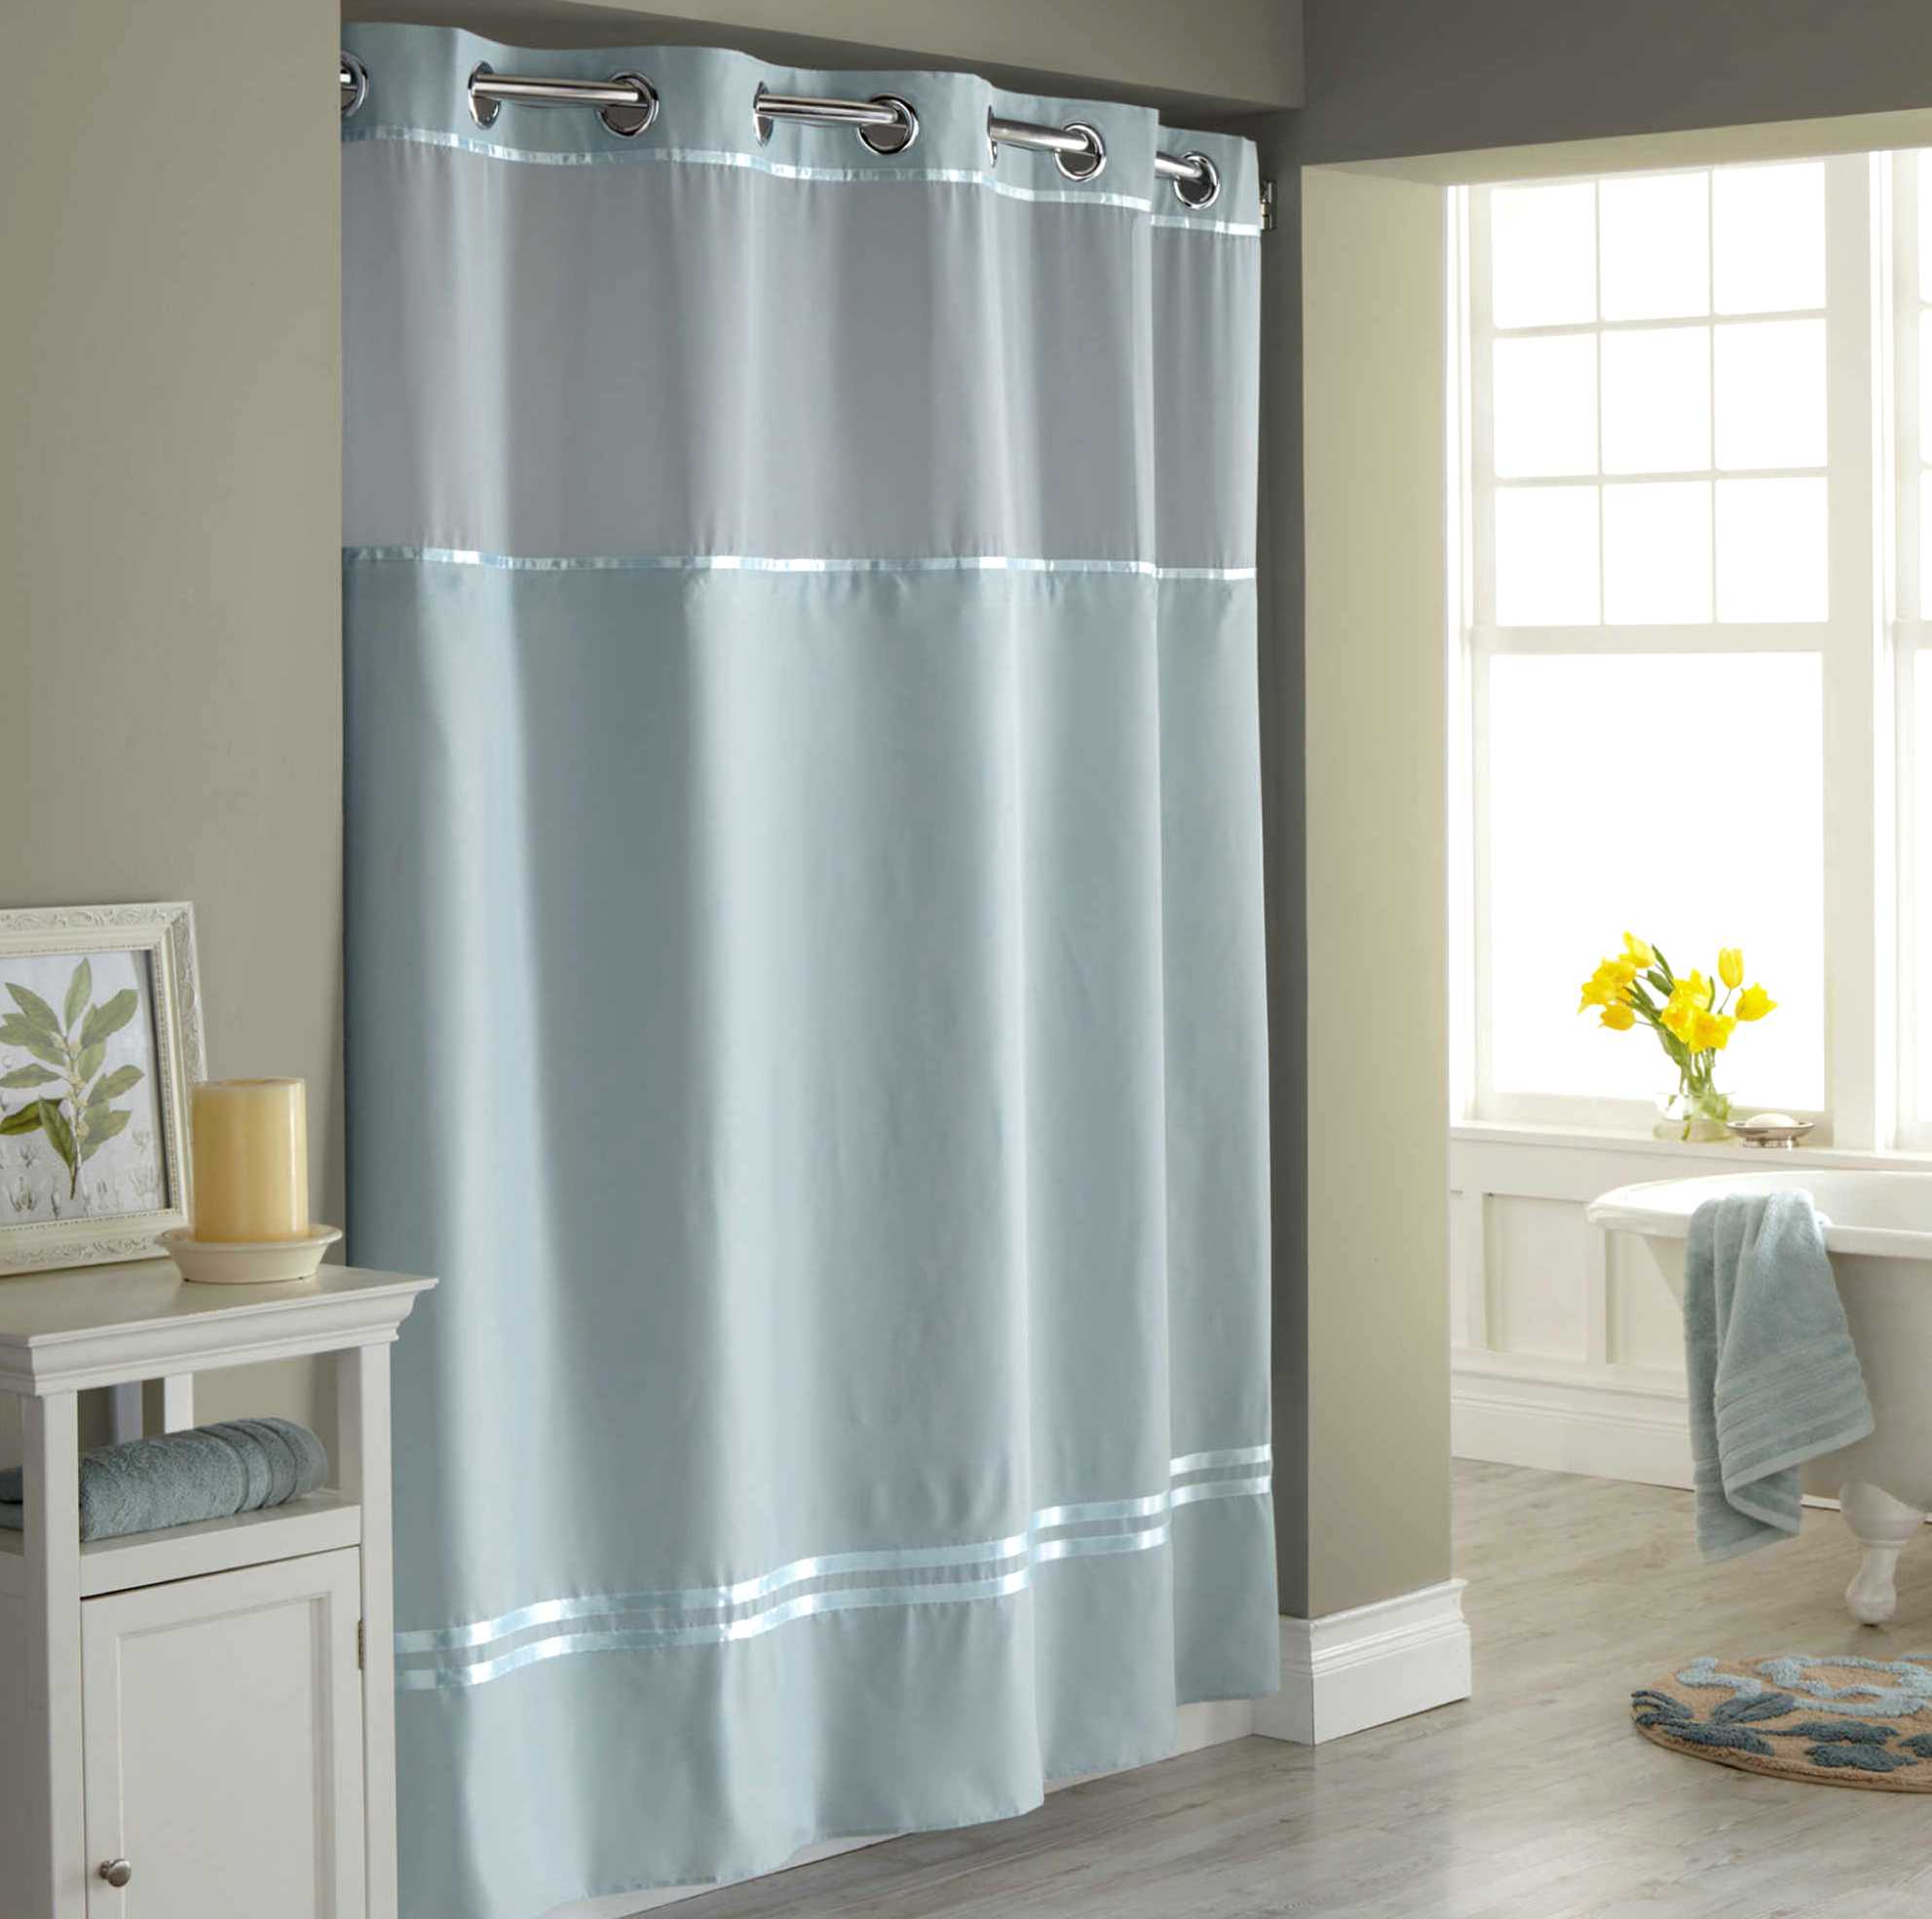 Can You Dye Curtains Kitchen Shower Curtain